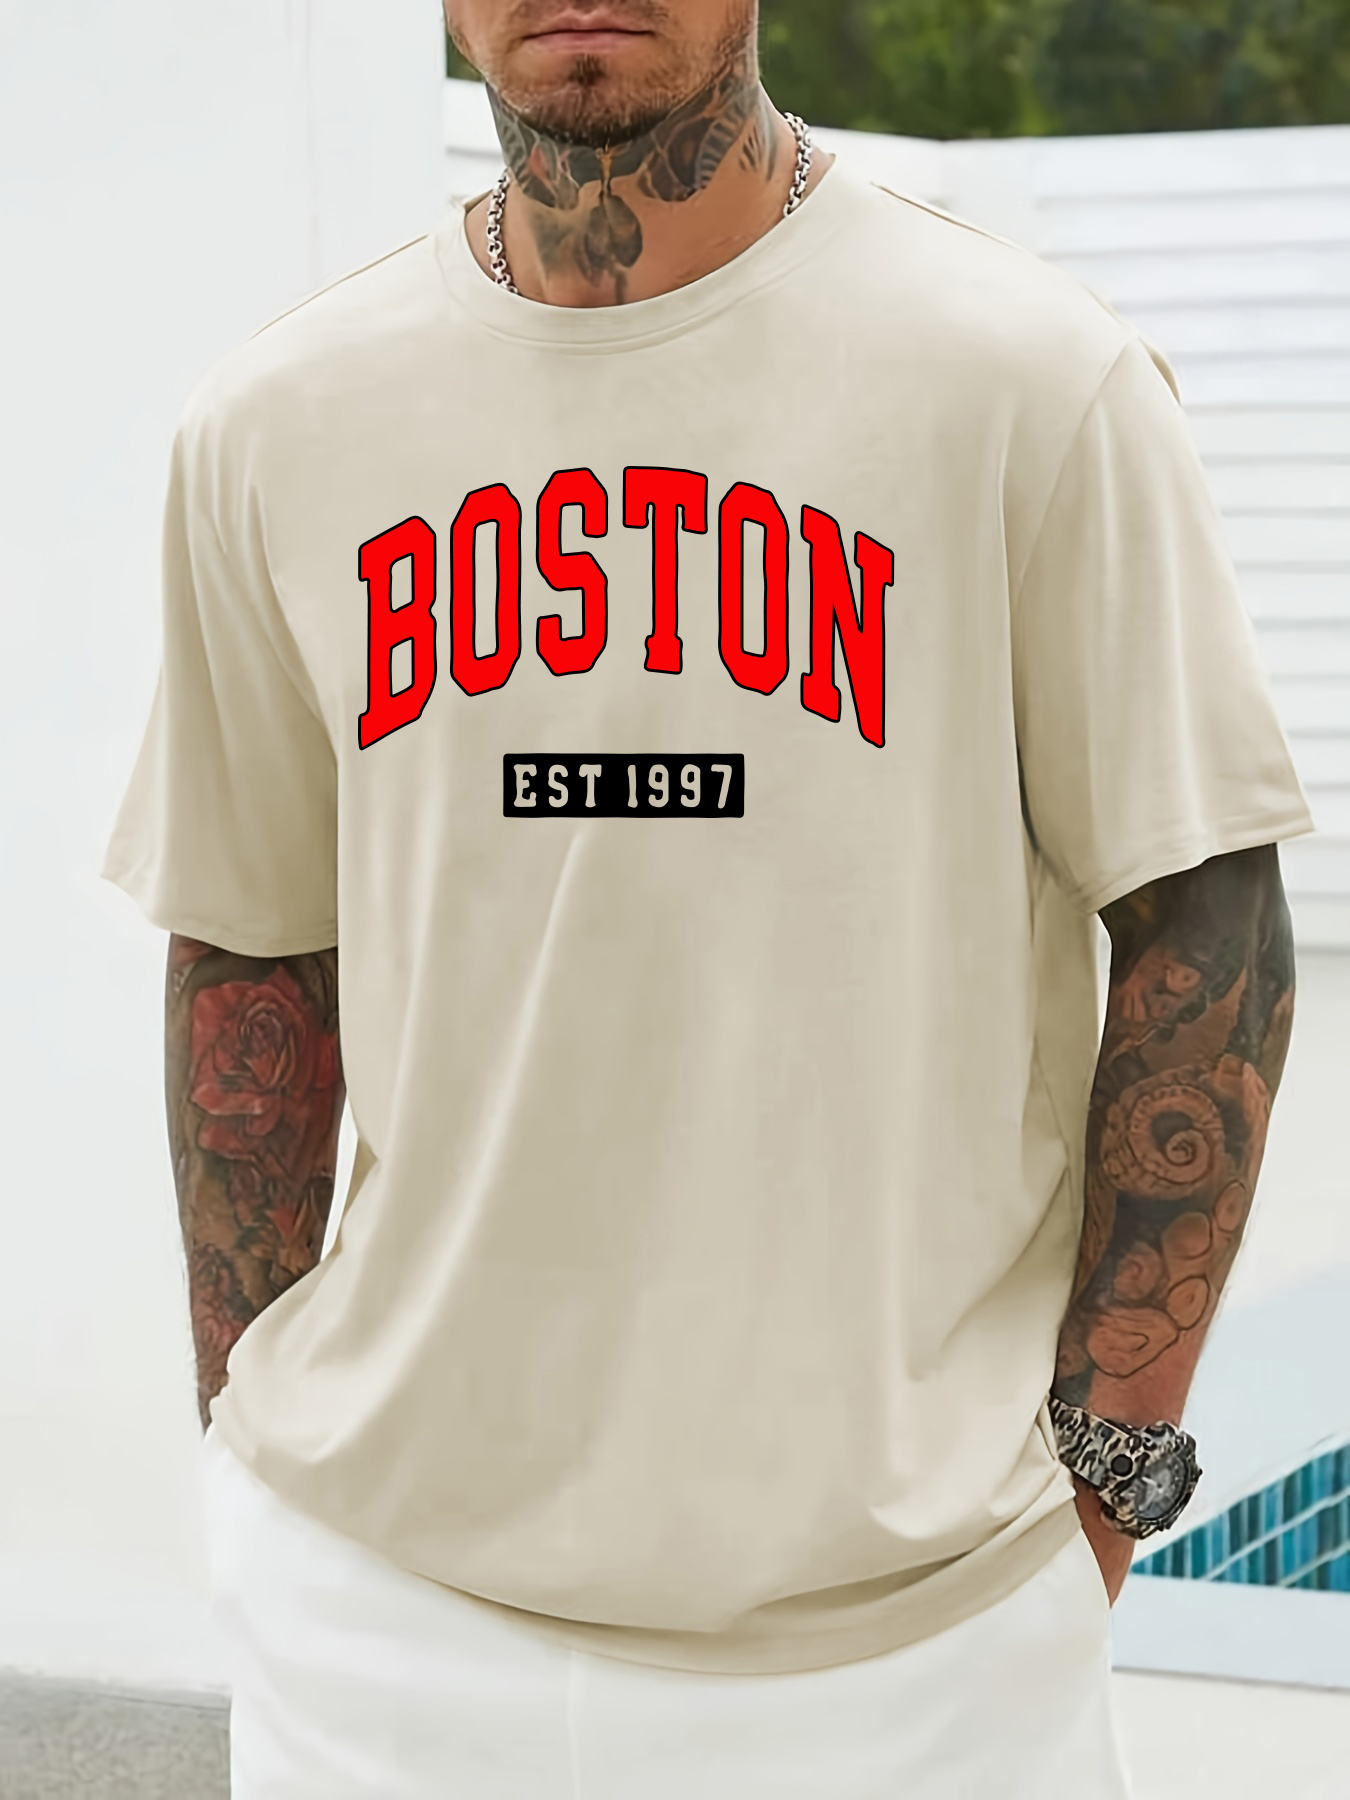 boston print short sleeve t shirts for men plus size stretchy graphic tees for summer casual daily style details 0